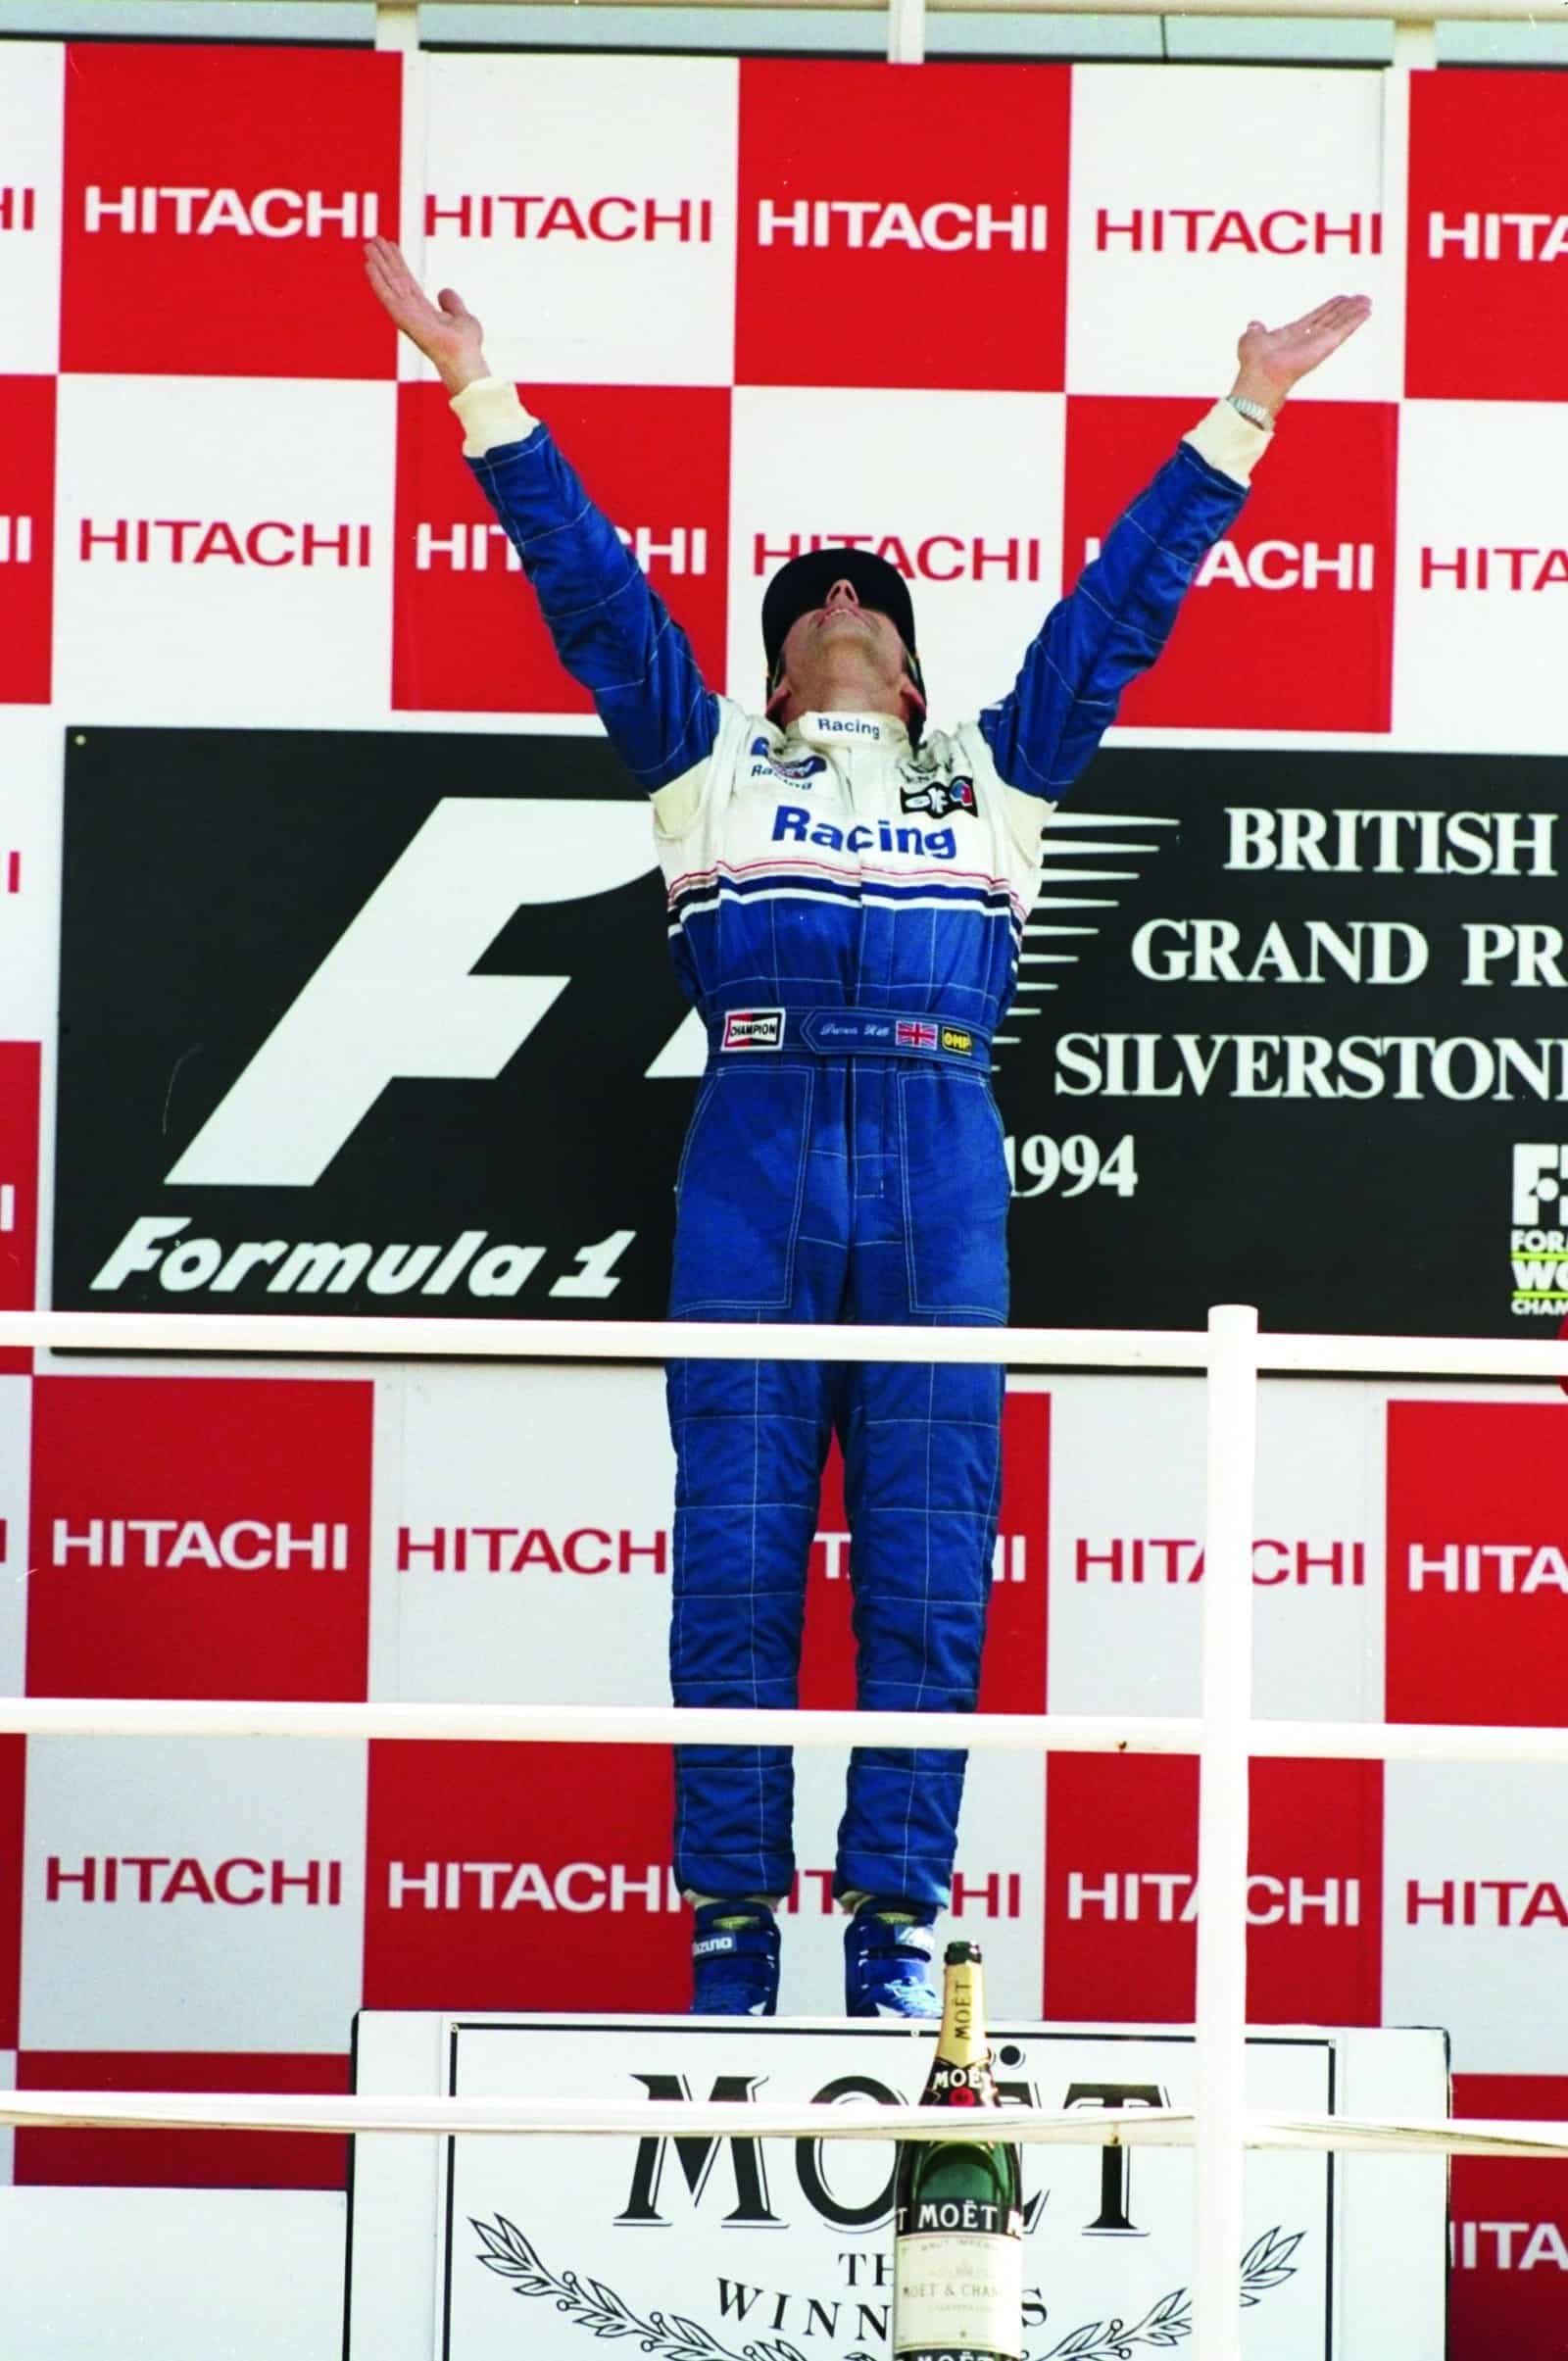 Damon-Hill-raises-his-hands-to-the-air-on-the-podium-after-winning-the-1994-F1-British-Grand-Prix-at-Silverstone